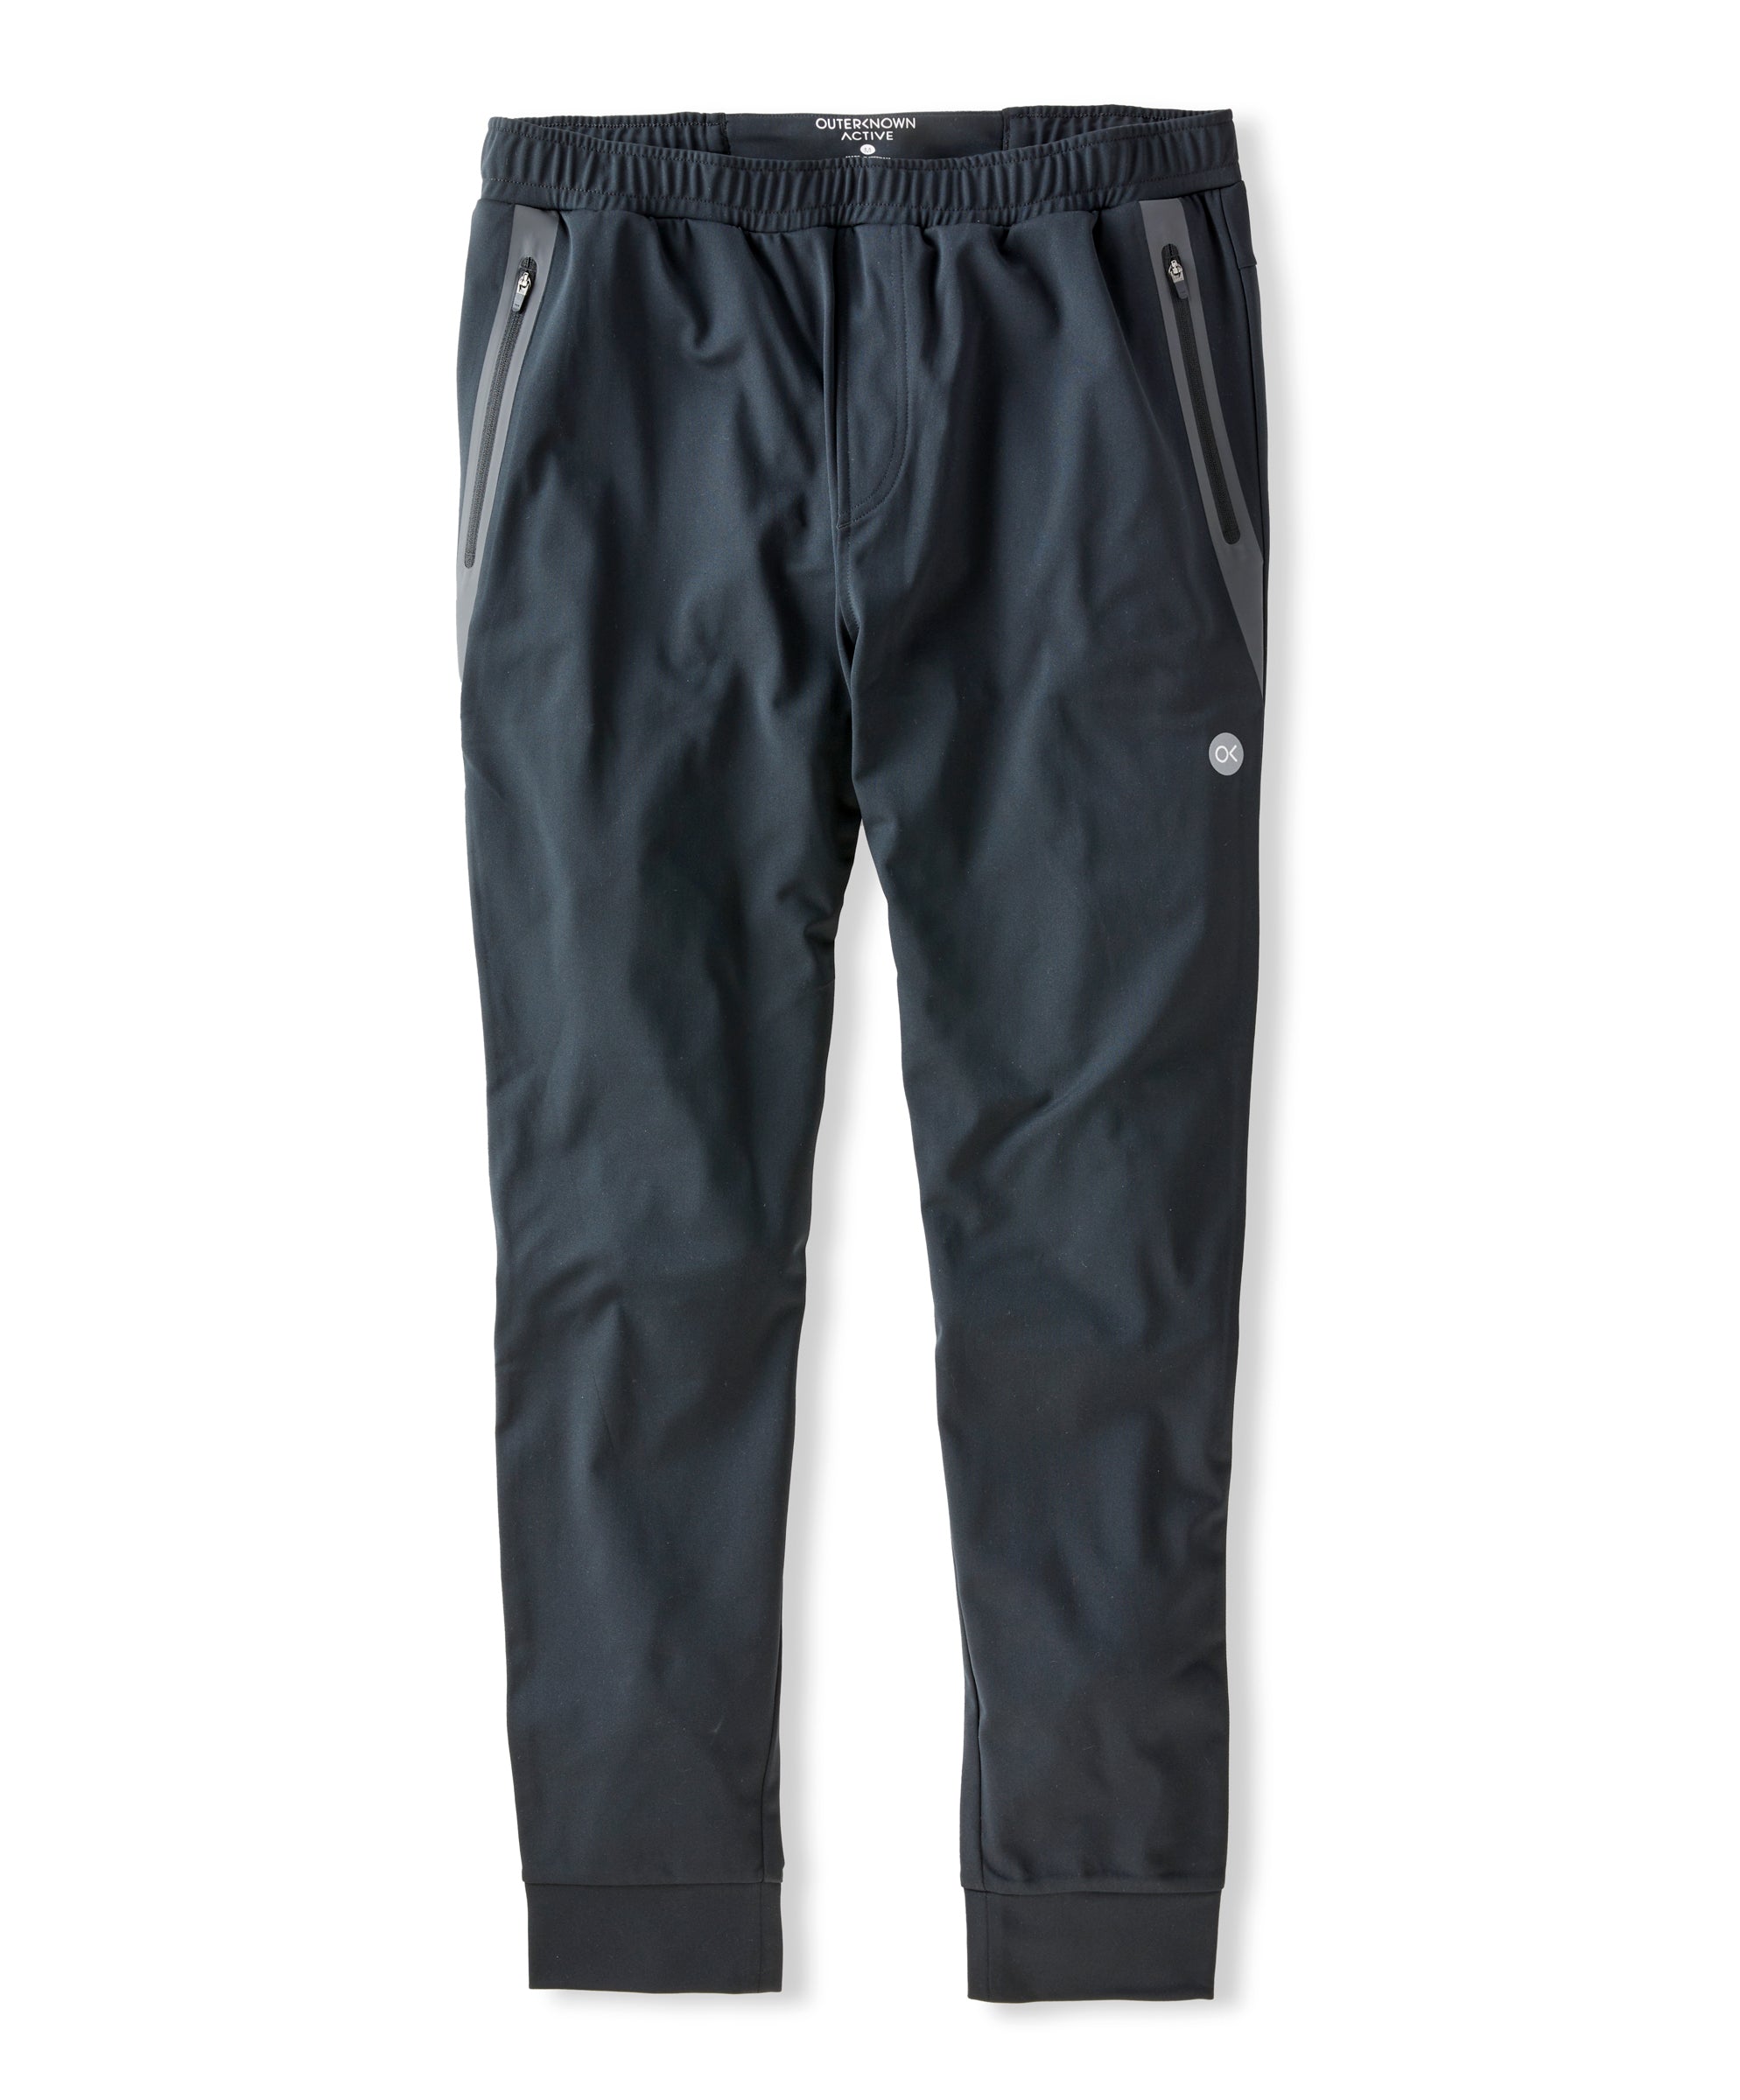 Warm-Up Knit Jogger | Men's Pants | Outerknown